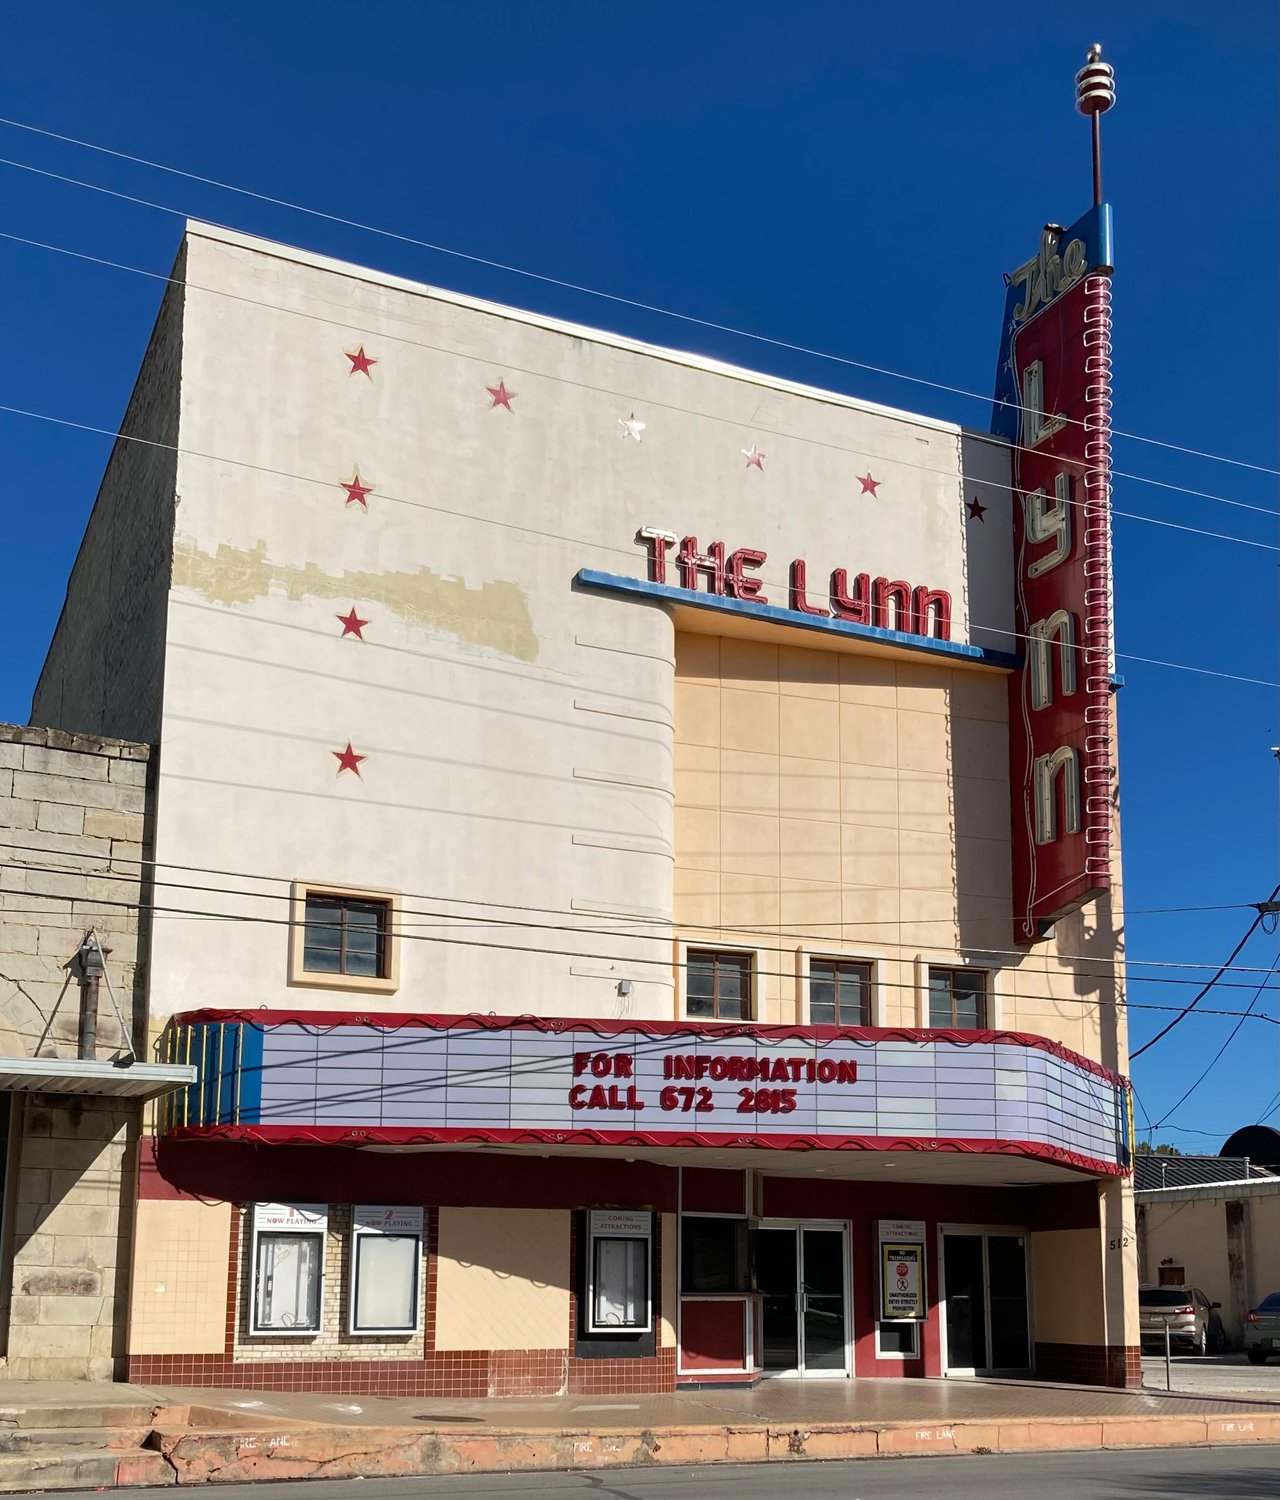 The Lynn Theatre stands out for its attractive marquee, though it remains closed since last year.